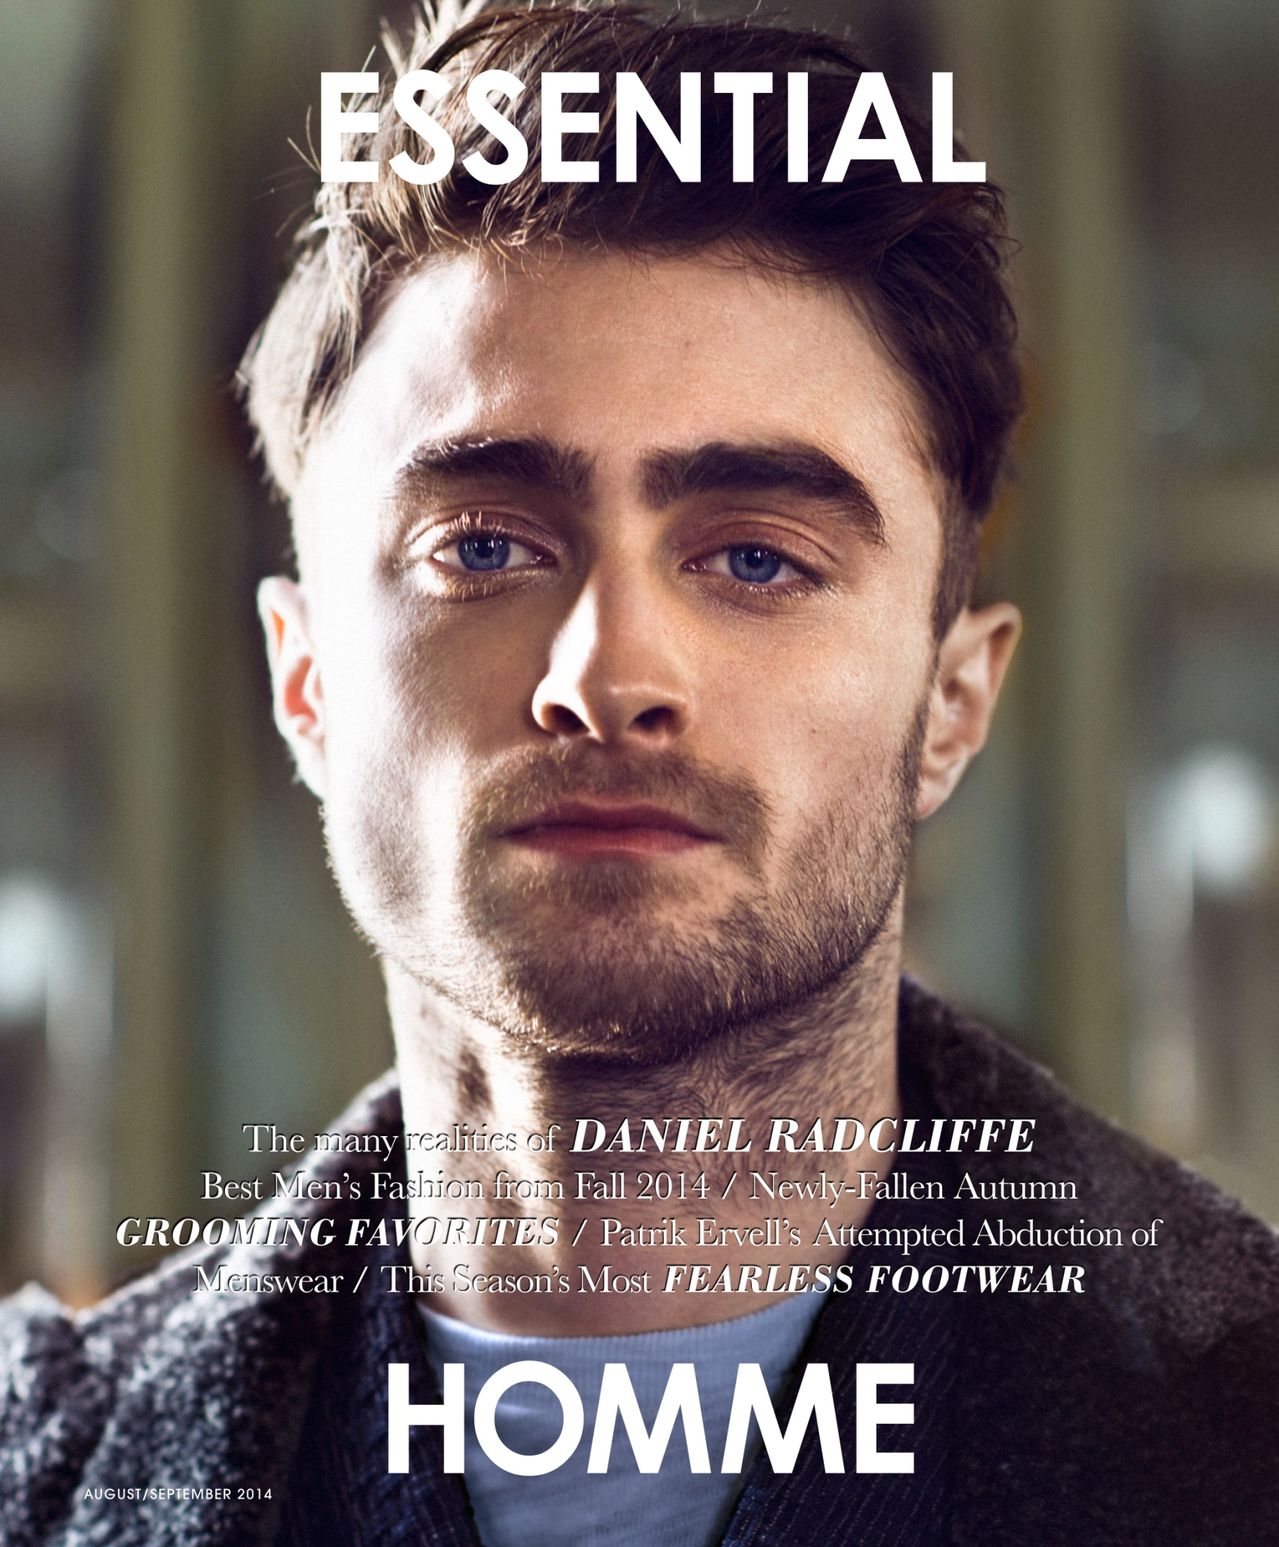 Daniel Radcliffe by Kevin Sinclair for Essential Homme August/September 2014